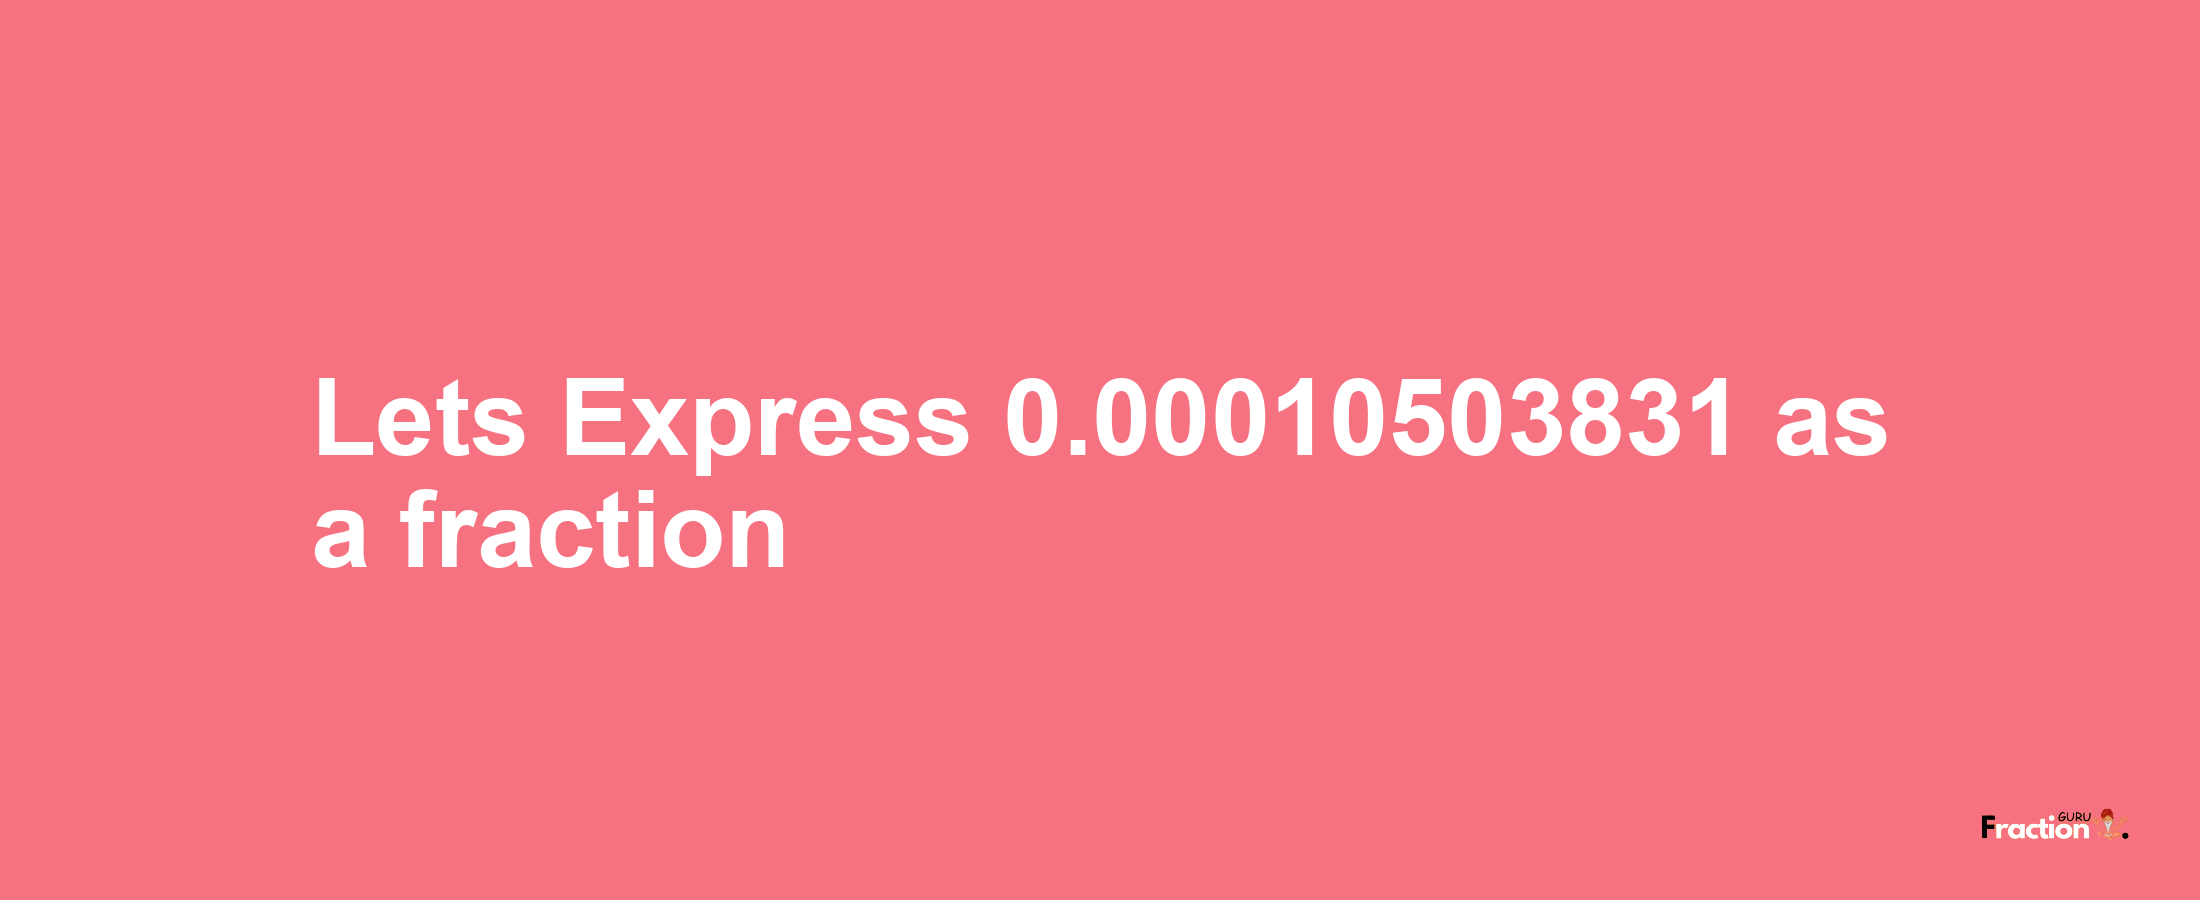 Lets Express 0.00010503831 as afraction